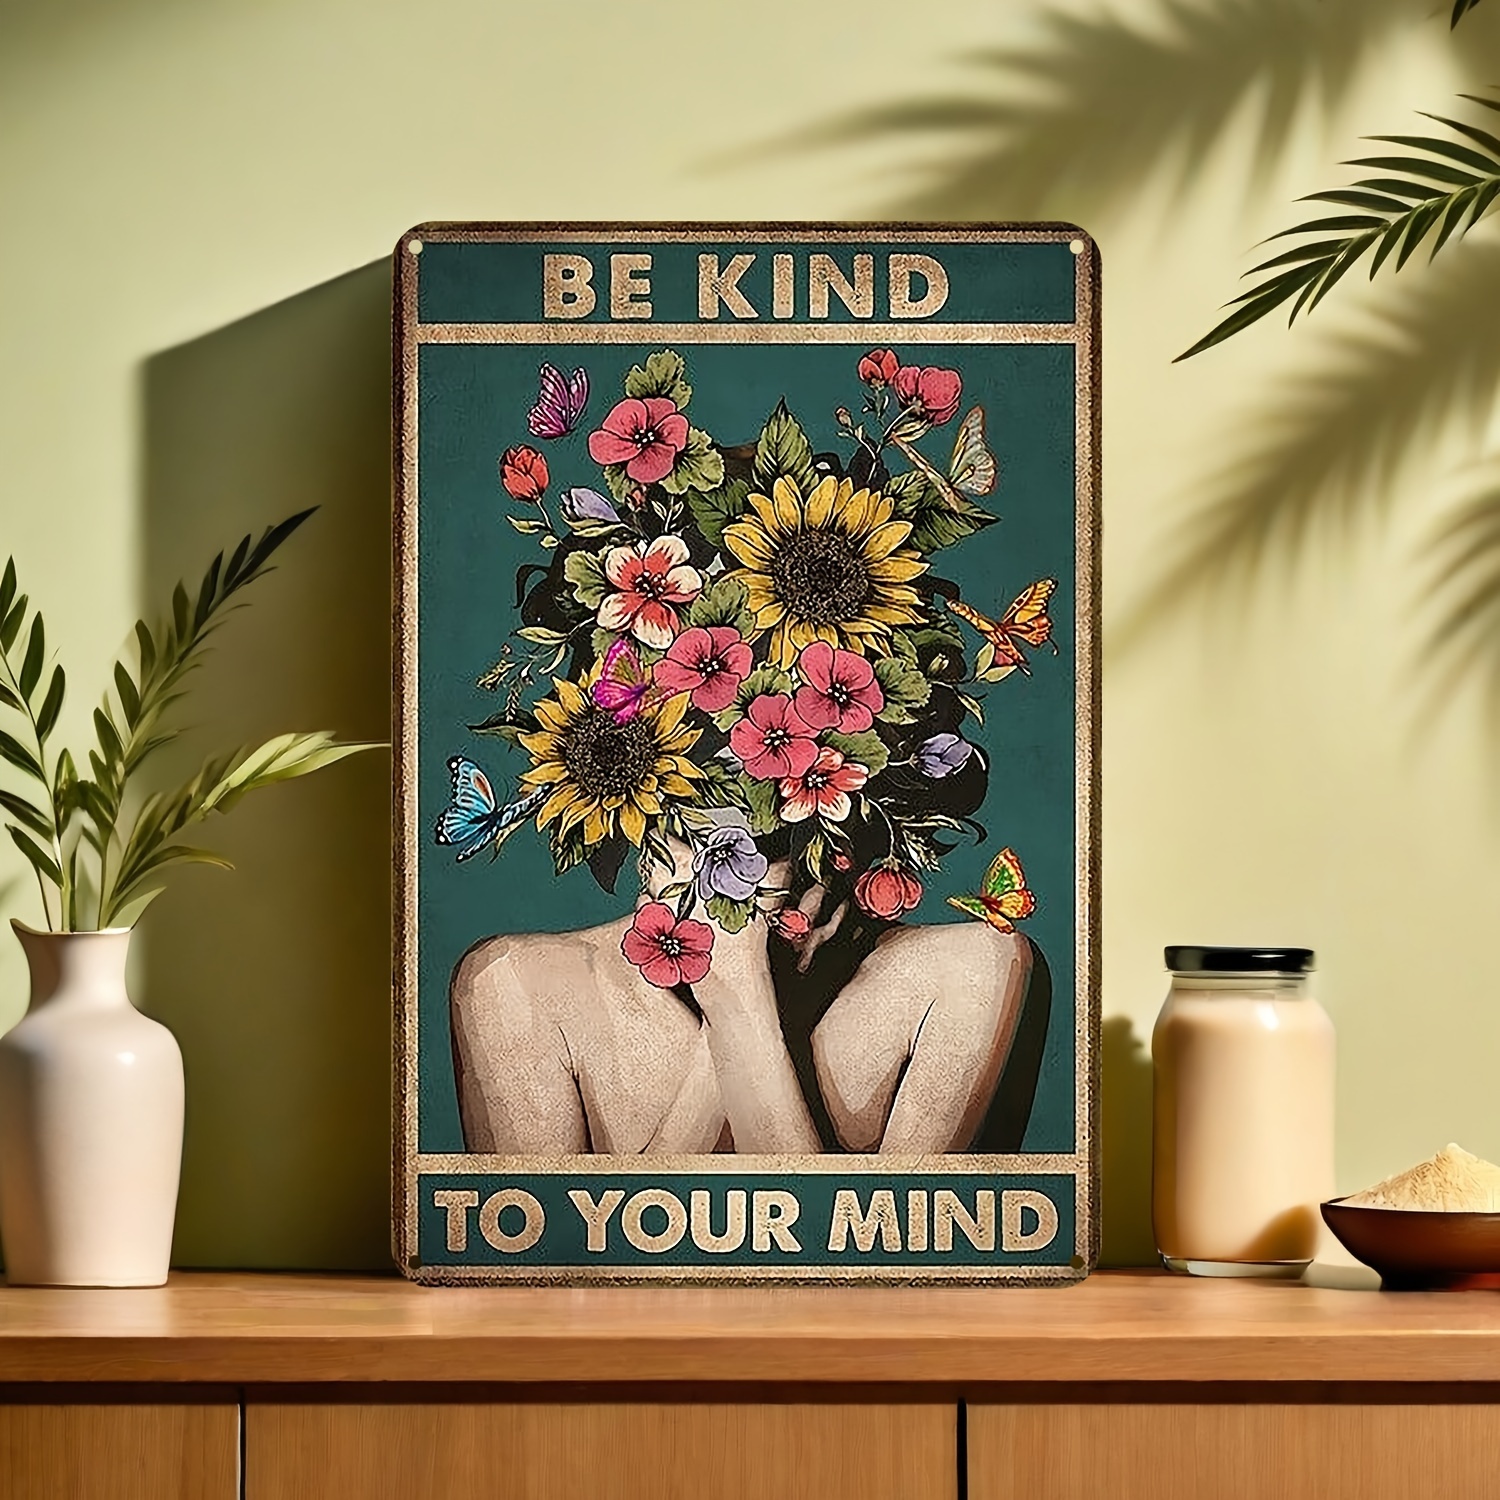 

Be Kind To Your Mind Vintage Metal Tin Sign, Waterproof Iron Wall Art Decor For Home, Garden, Bedroom, Bar, Bathroom, 20x30cm